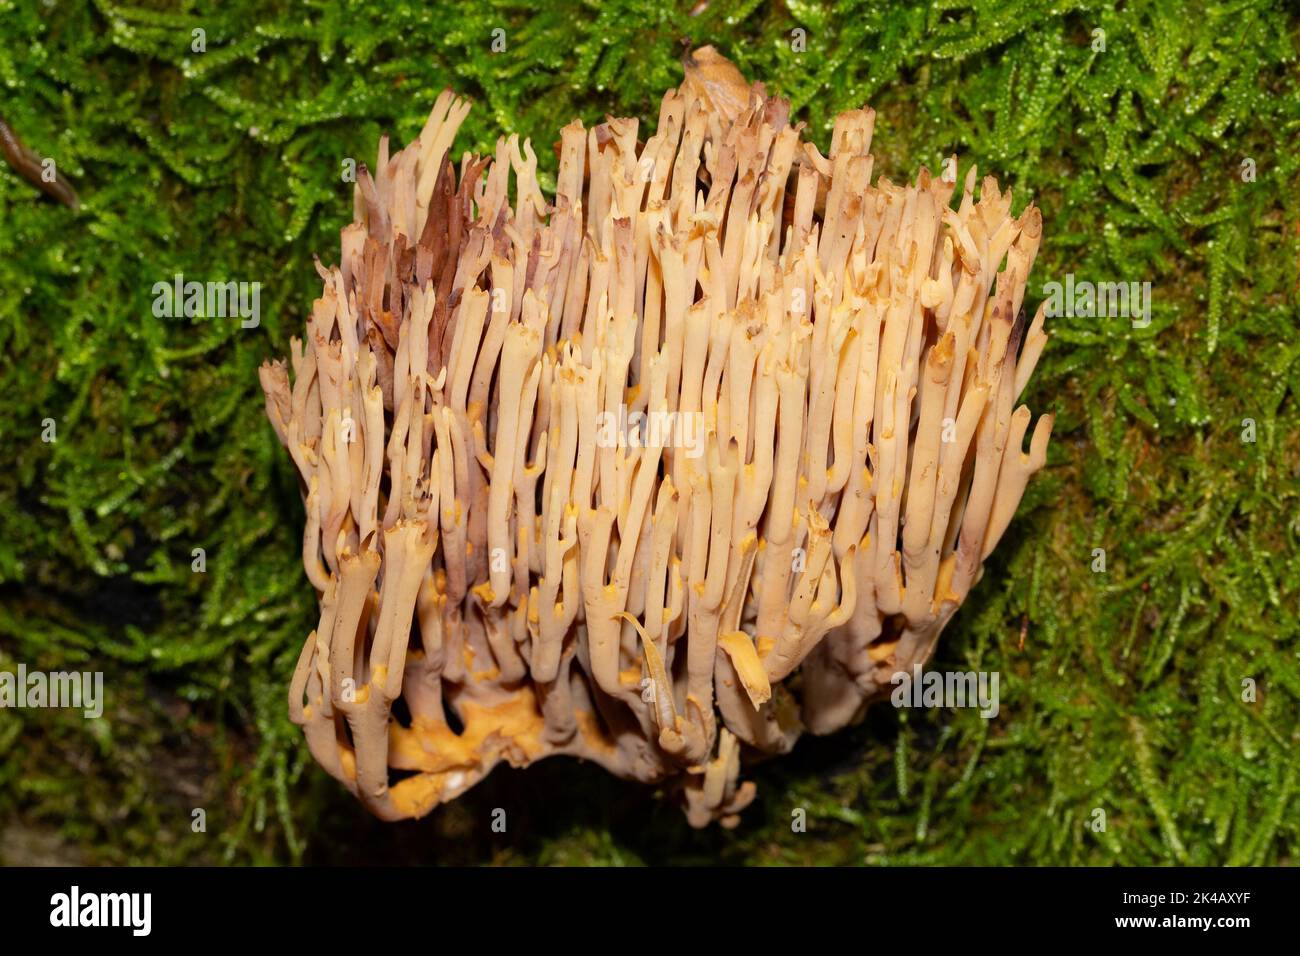 Stiff coral yellow-brown bushy spiny fruit body in green moss Stock Photo